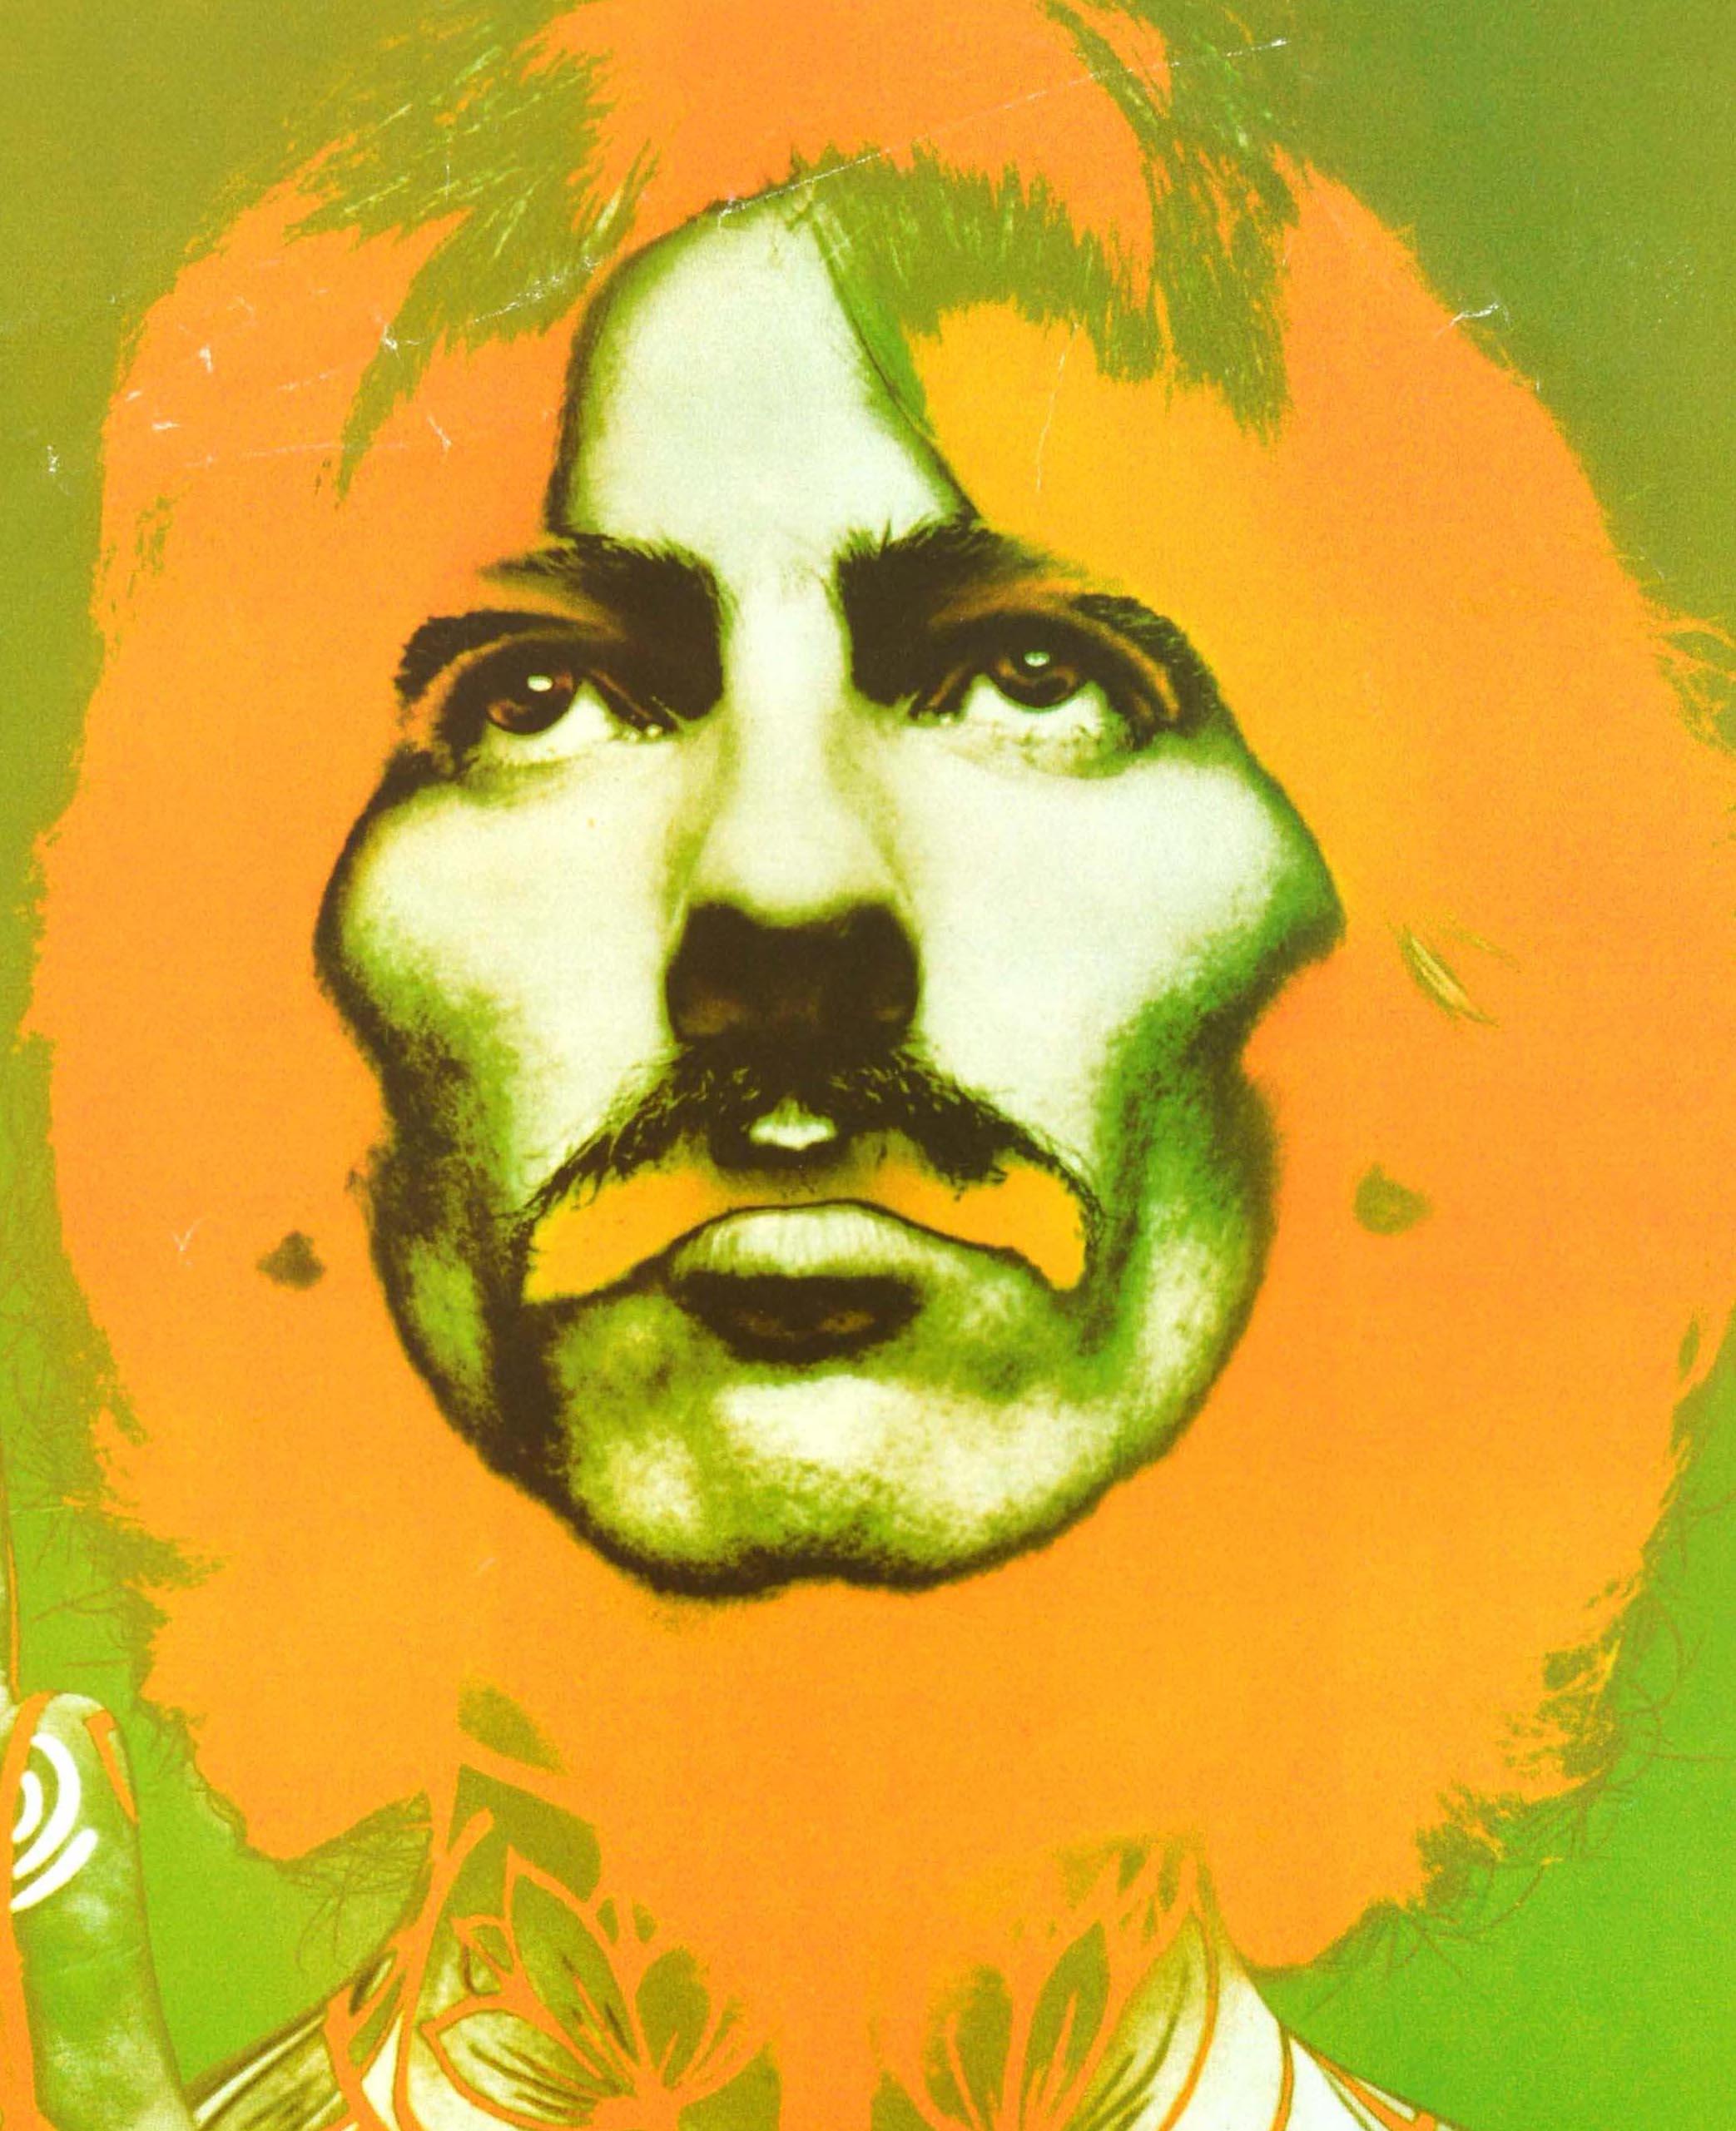 Original vintage music advertising poster featuring a colourful and psychedelic photo design using a new solarisation technique by the American photographer Richard Avedon (1923-2004) of the Beatles musician and singer songwriter George Harrison